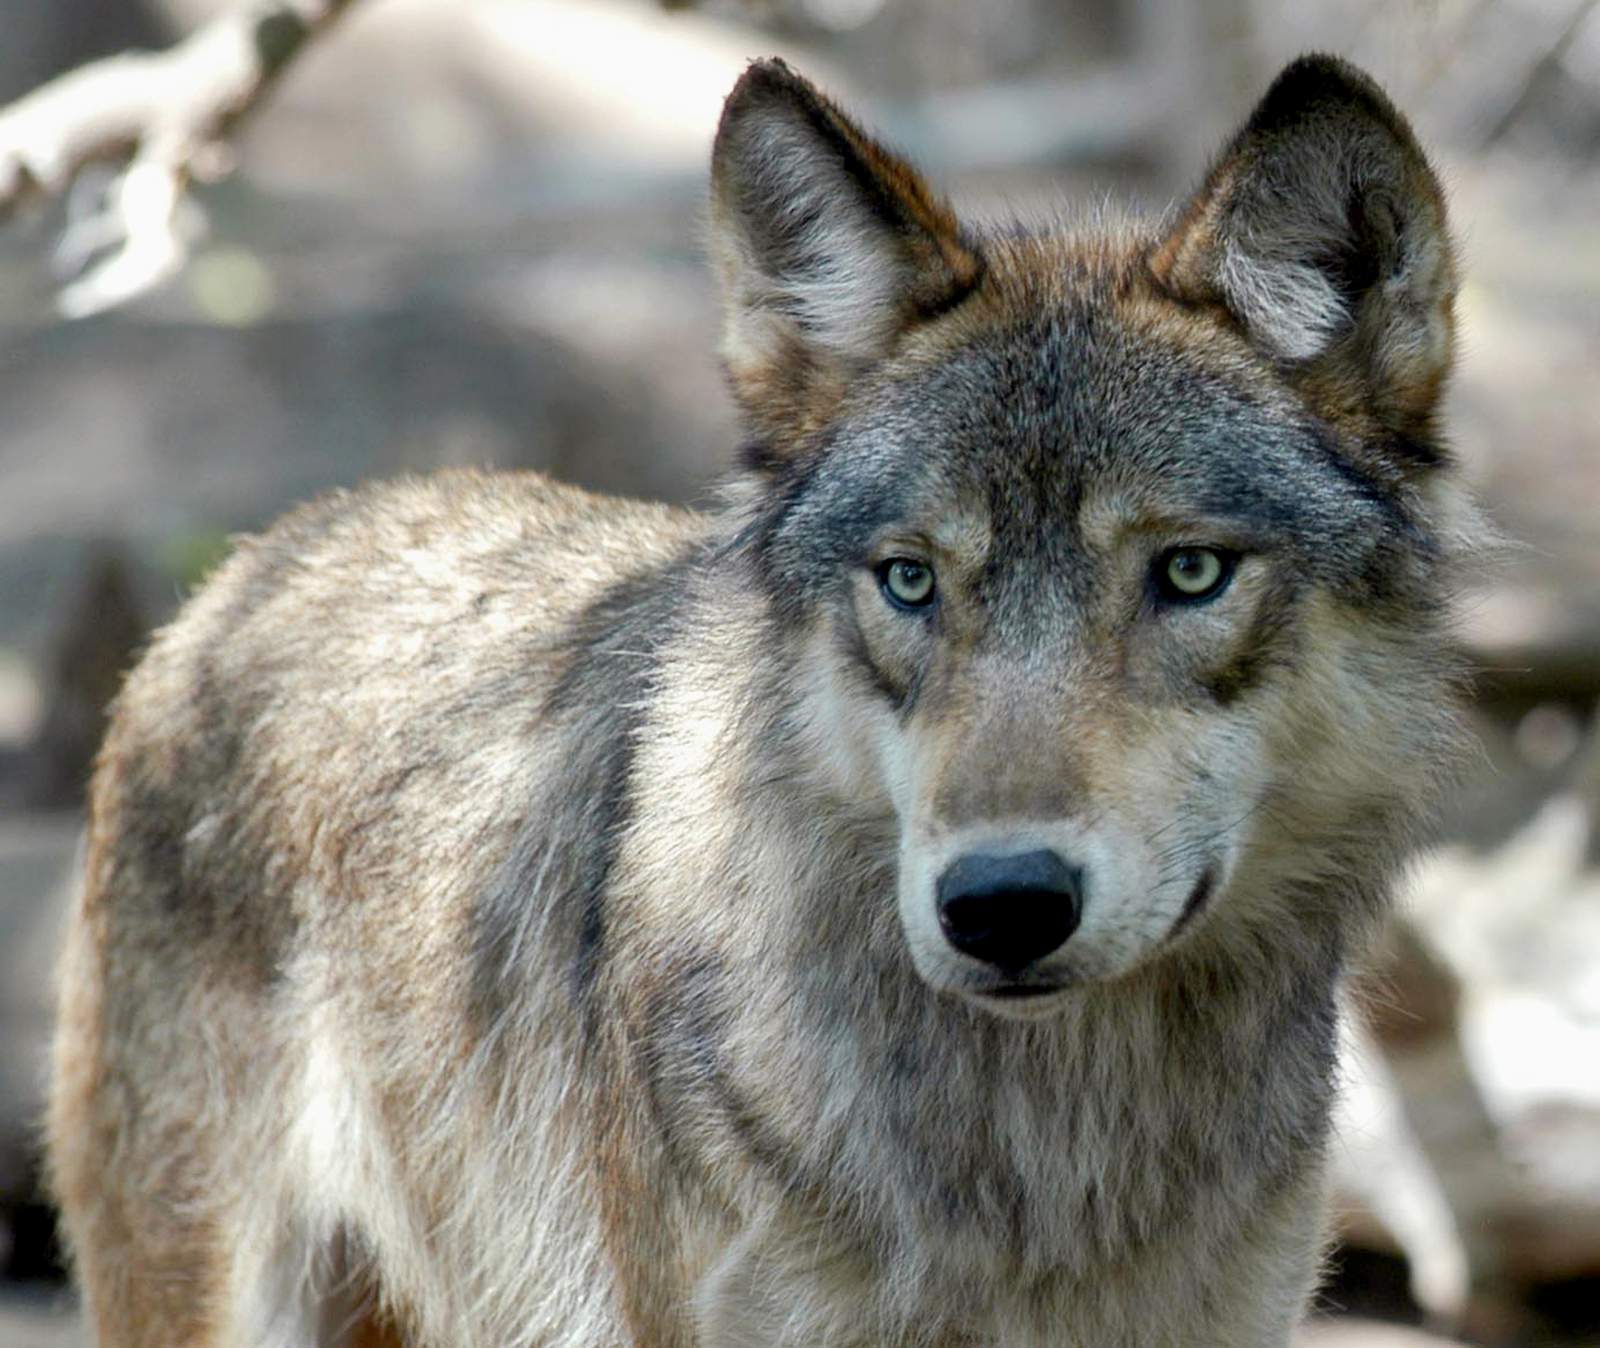 US states look to step up wolf kills, pushed by Republicans